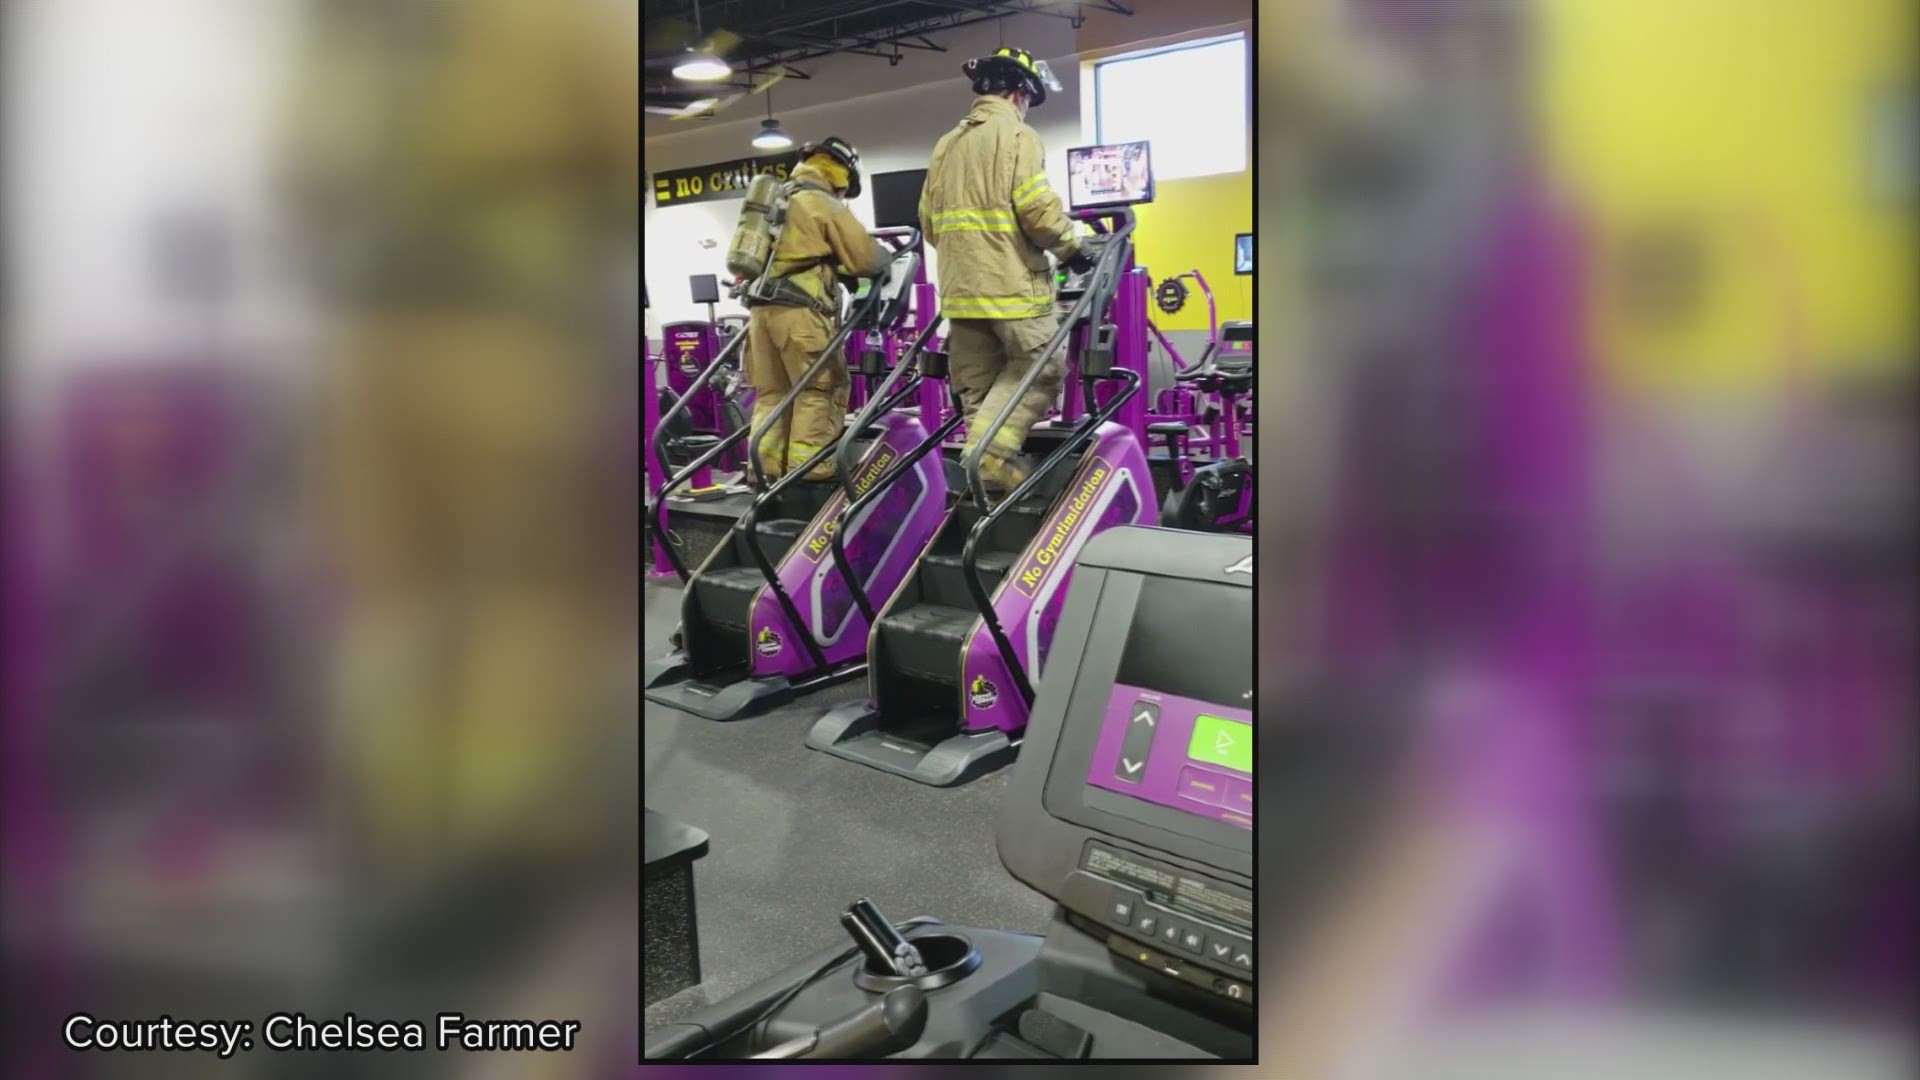 Two firefighters climb 110 flights of stairs in honor of 9/11